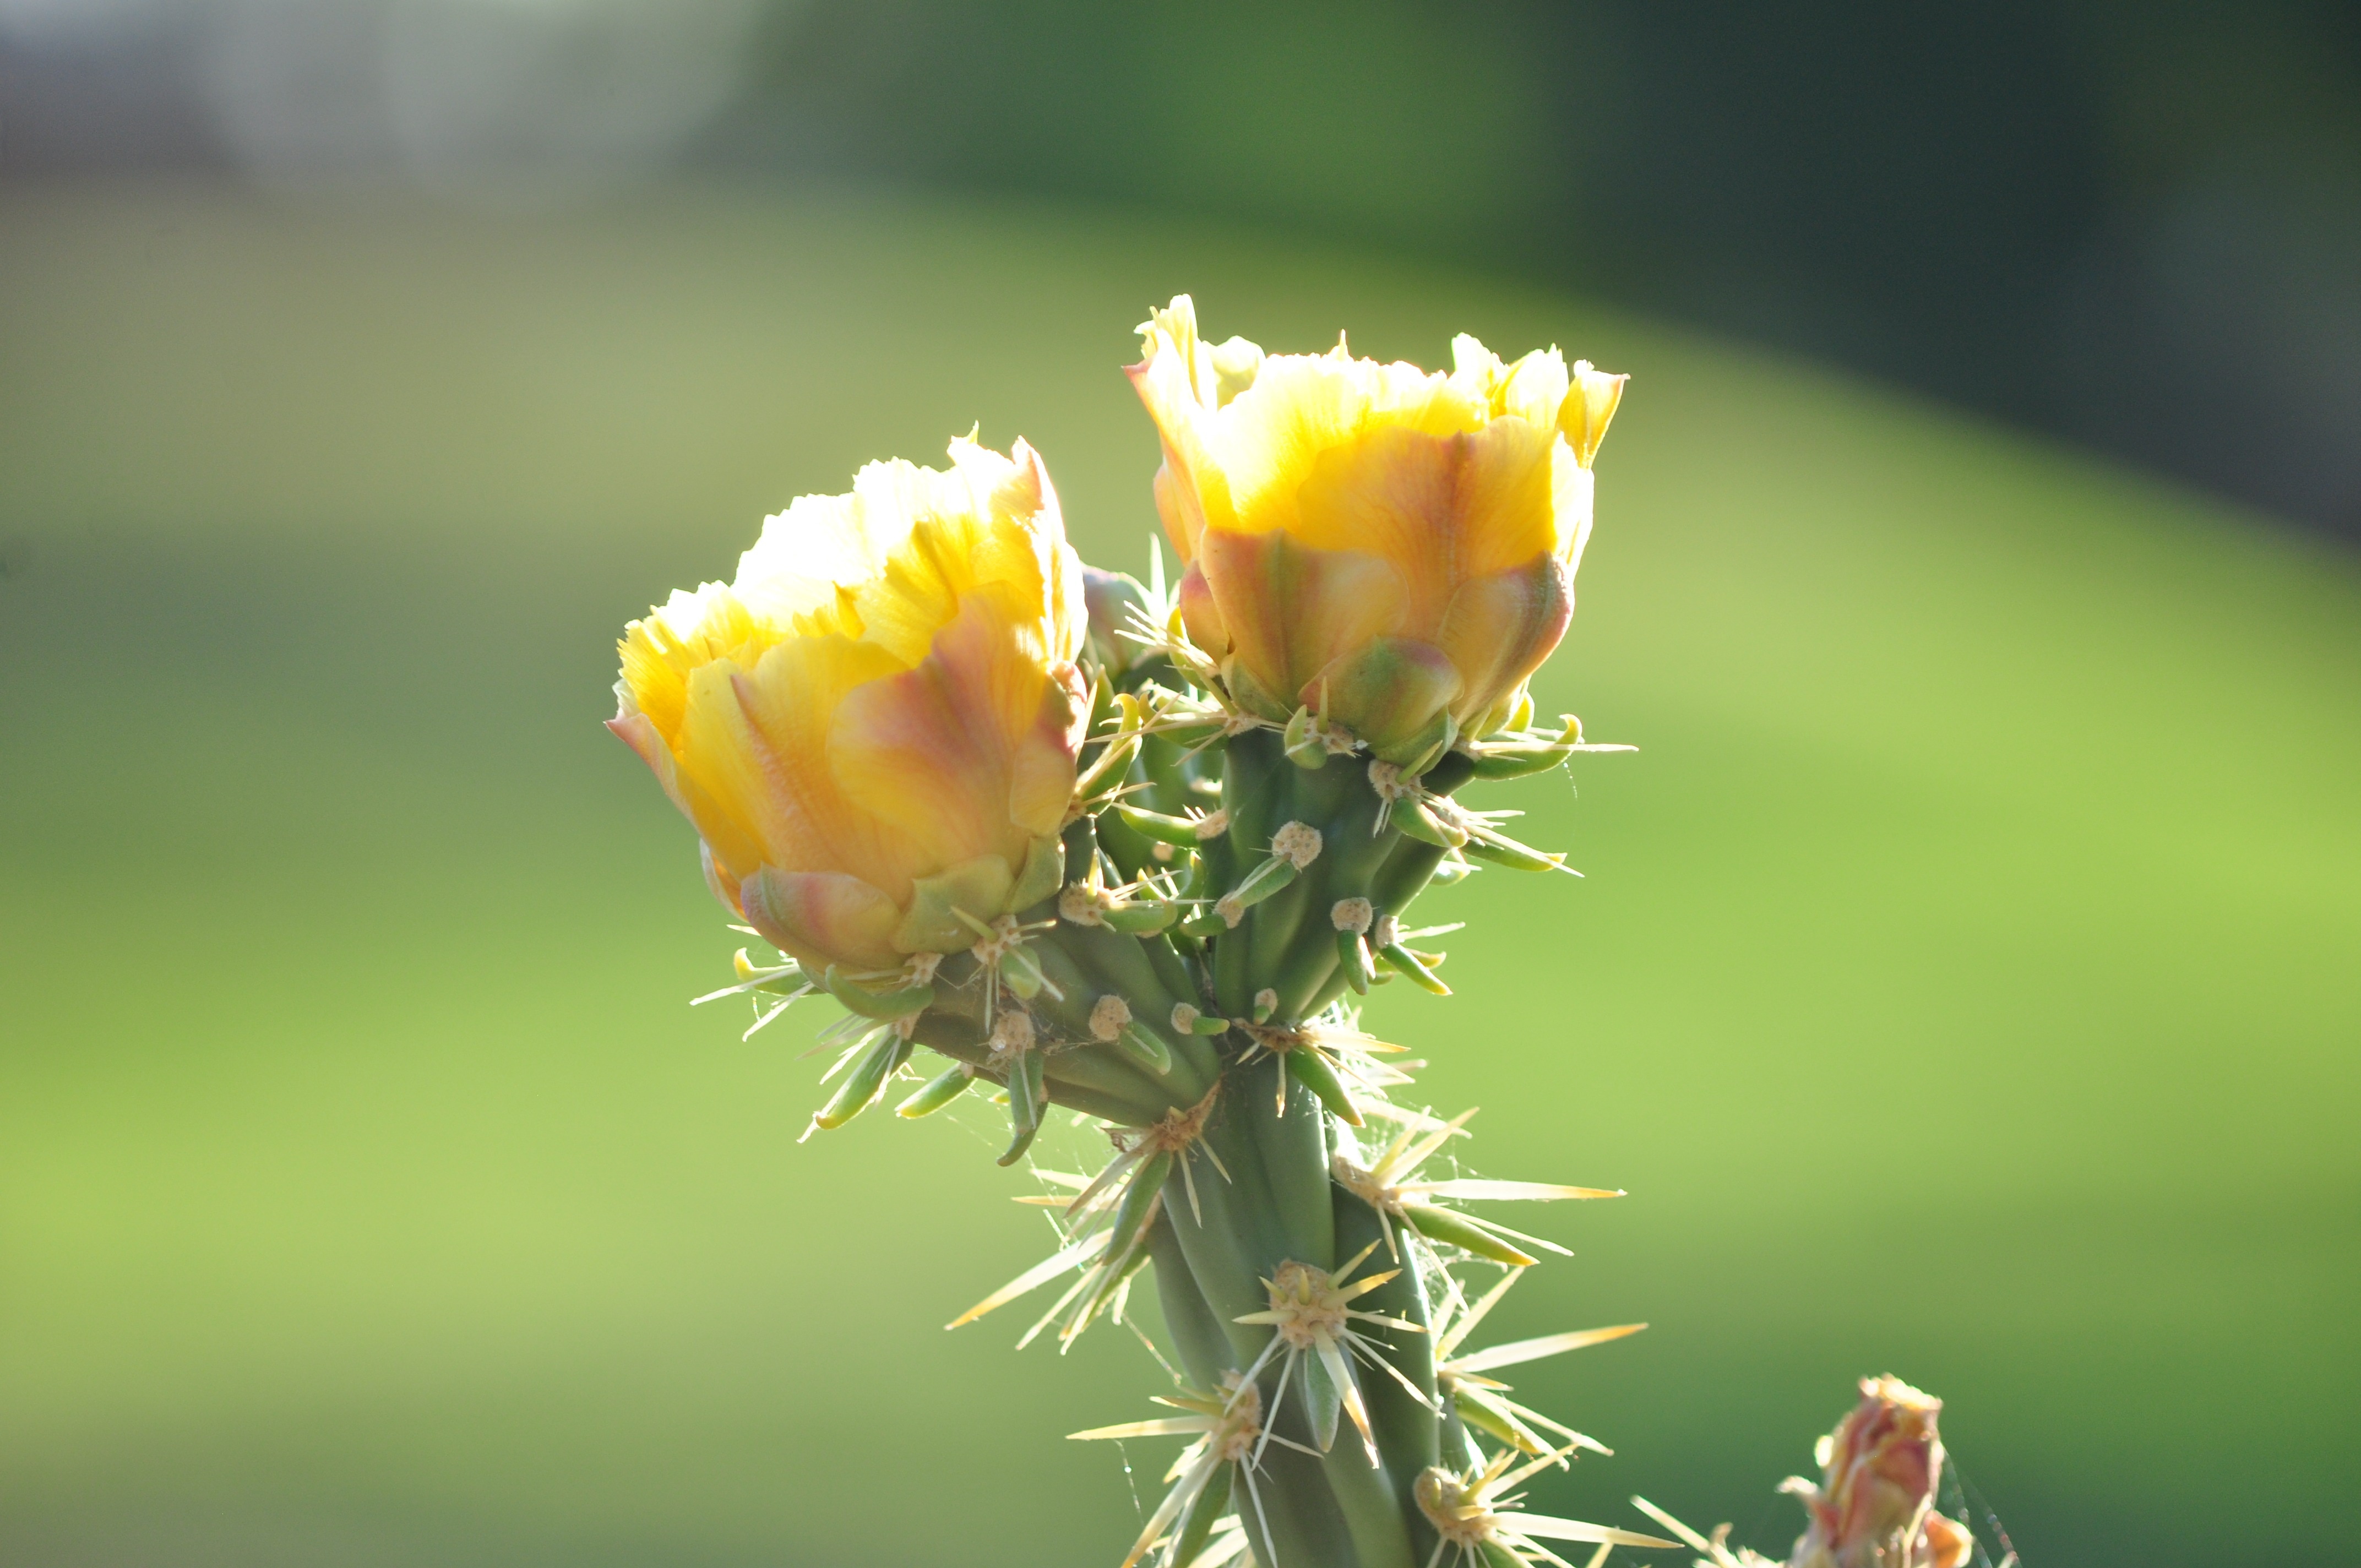 yellow flower with thorn stem